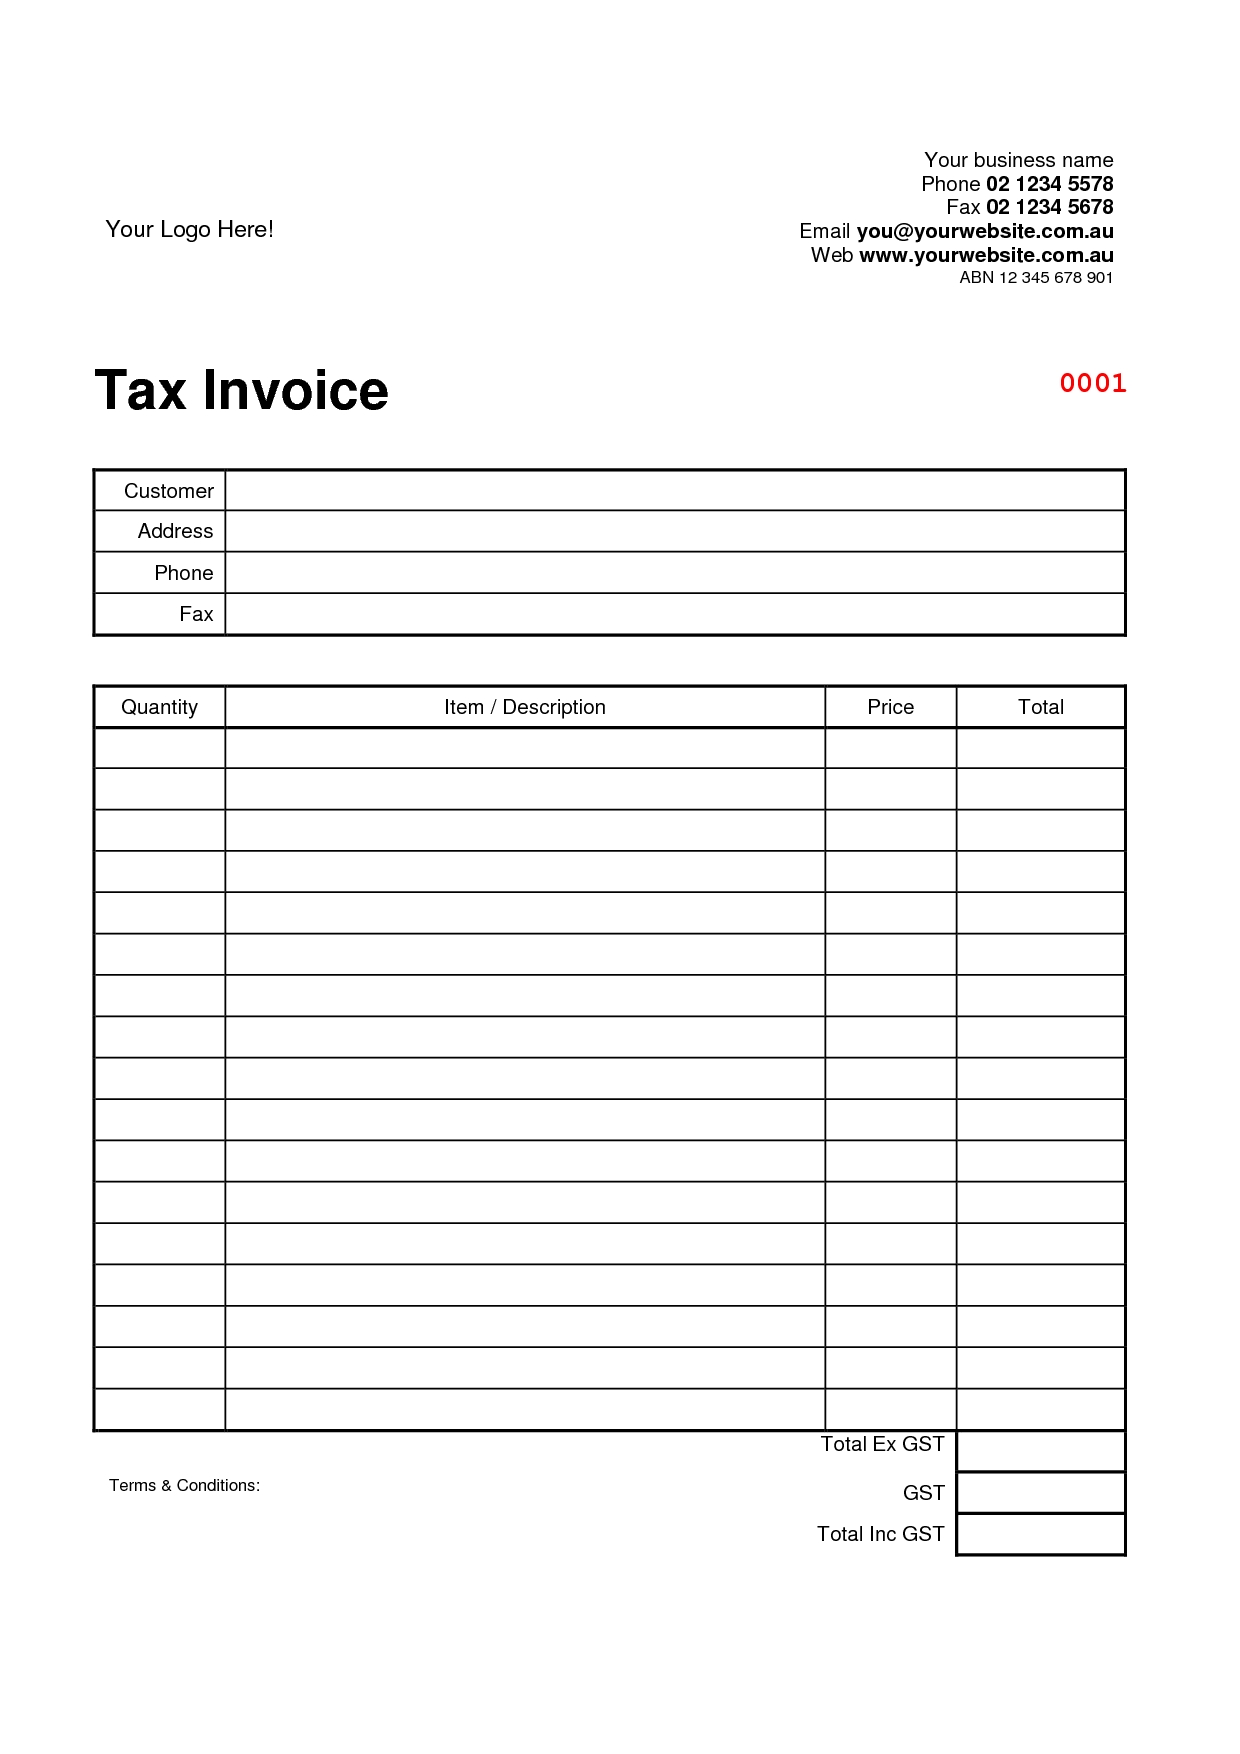 free tax invoice template excel invoice example tax invoice template excel